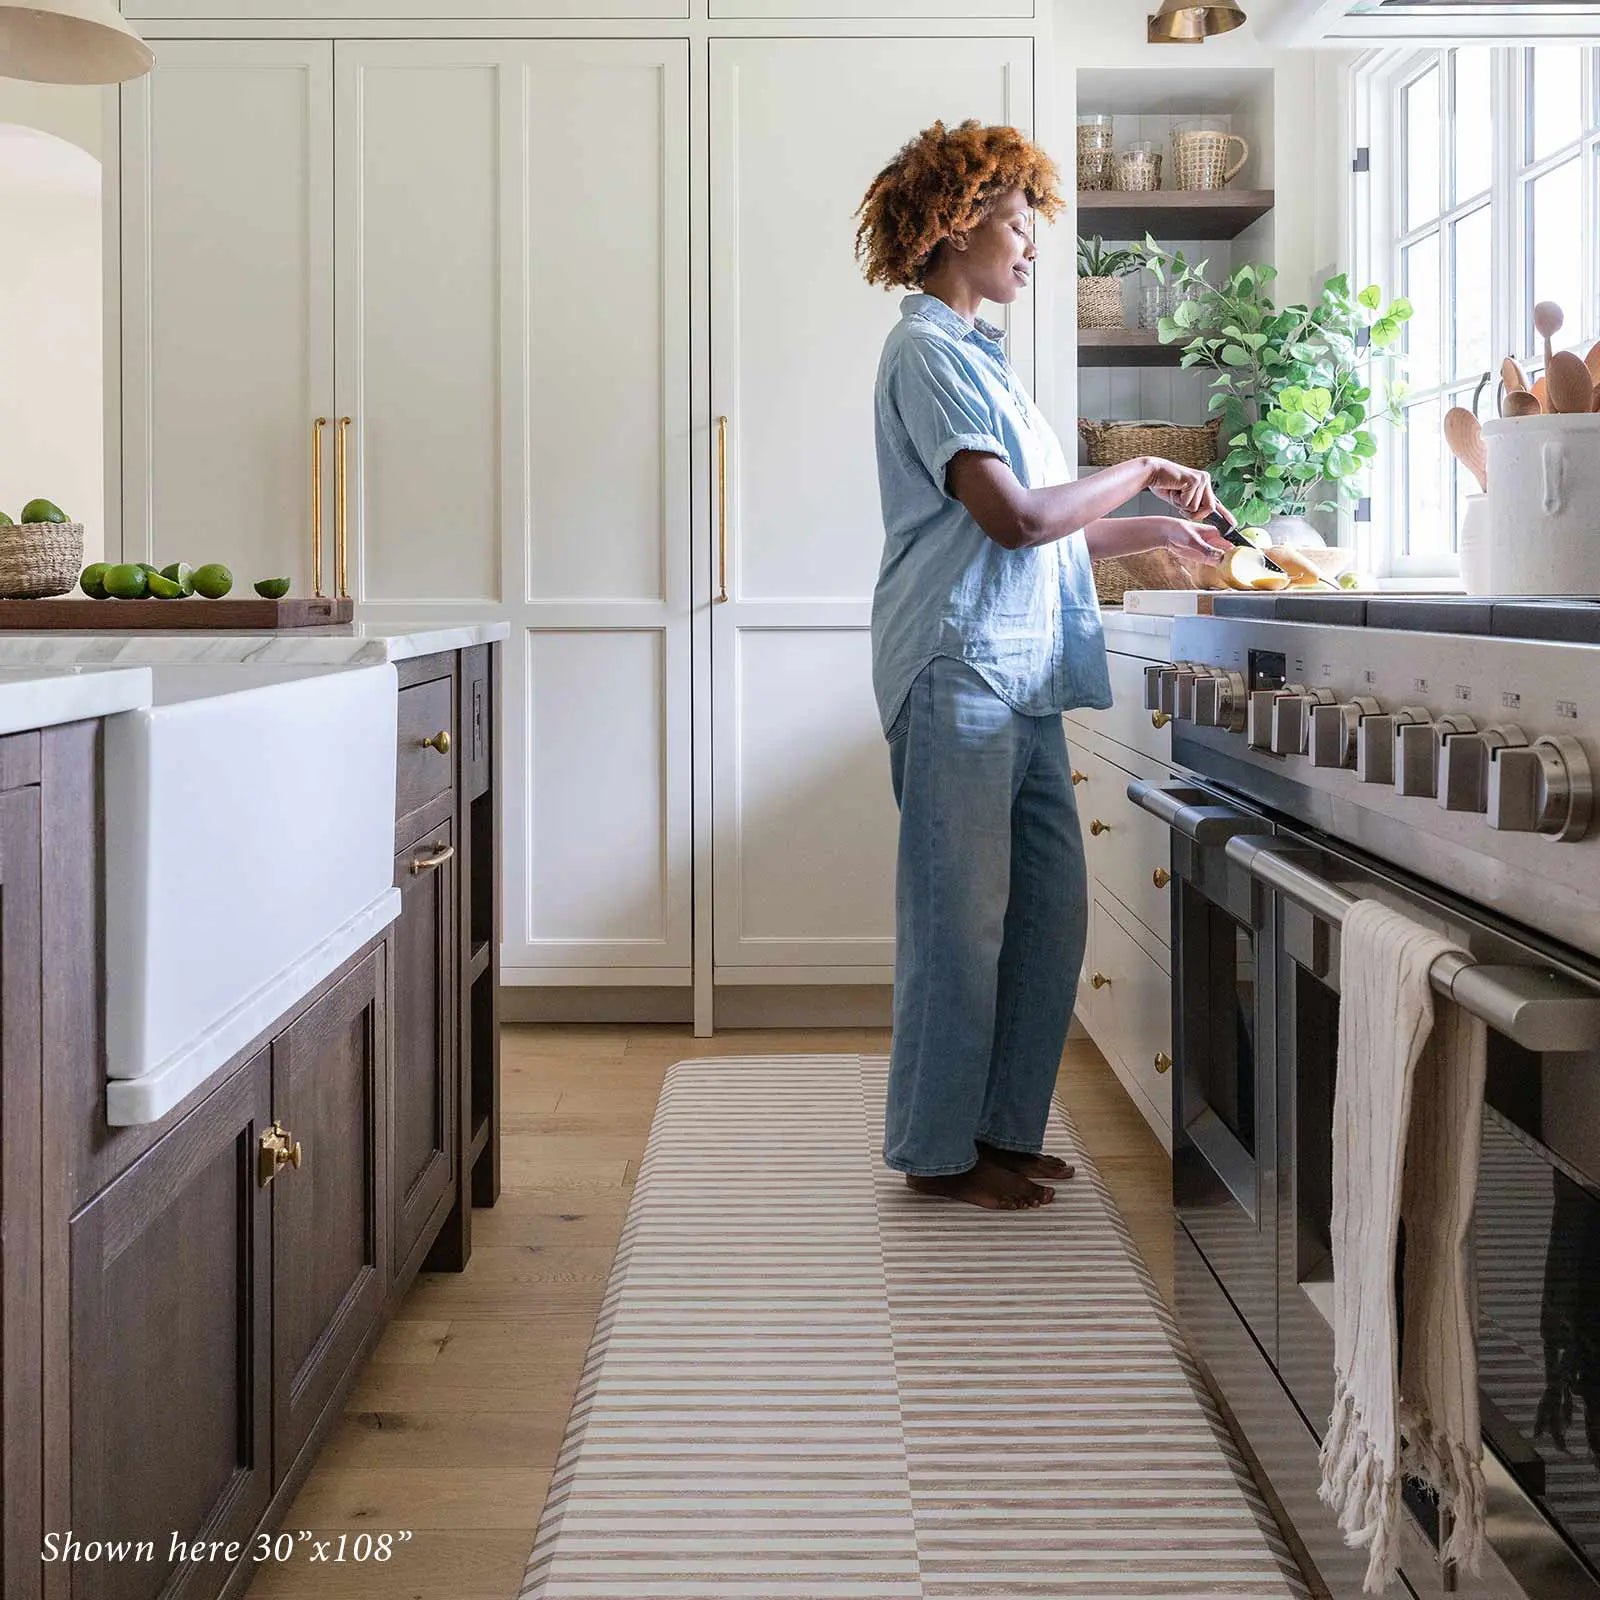 Reese chai beige and white inverted stripe standing mat shown in kitchen with woman cooking in size 30x108